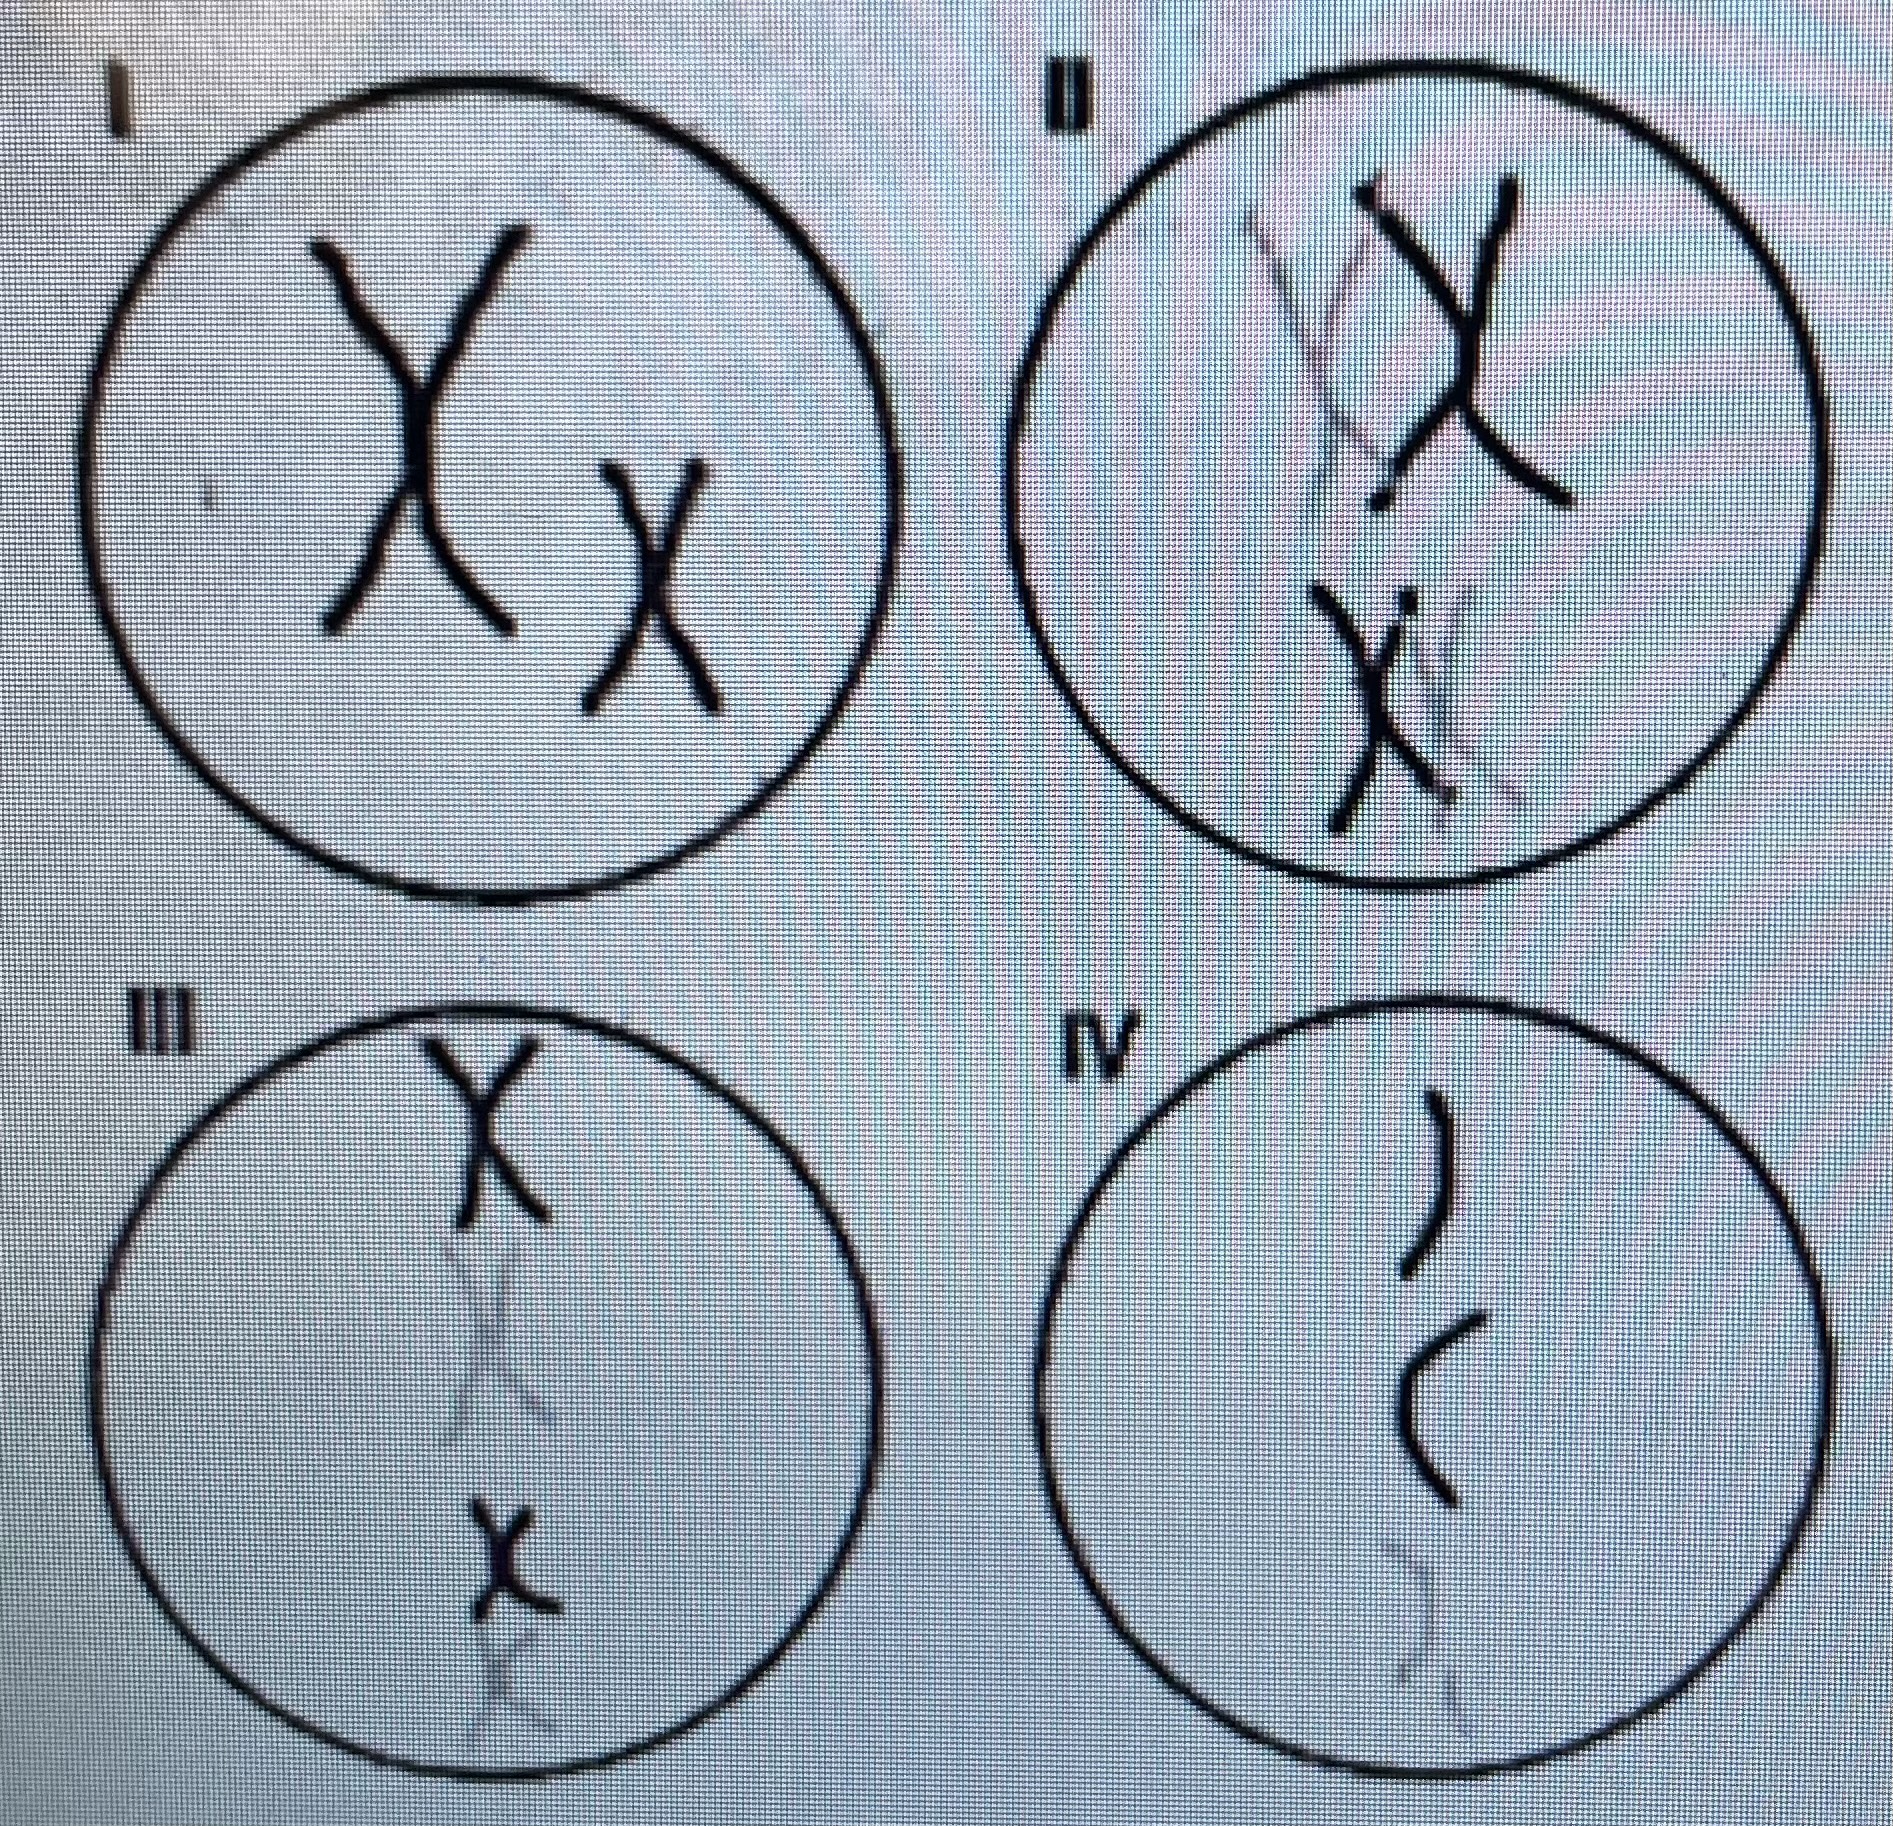 <ol start="12"><li><p>Compare and contrast stages of meiosis. Which of the following images depicts a cell in Metaphase II?</p></li></ol><p>a. I b. II c. III d. IV</p>